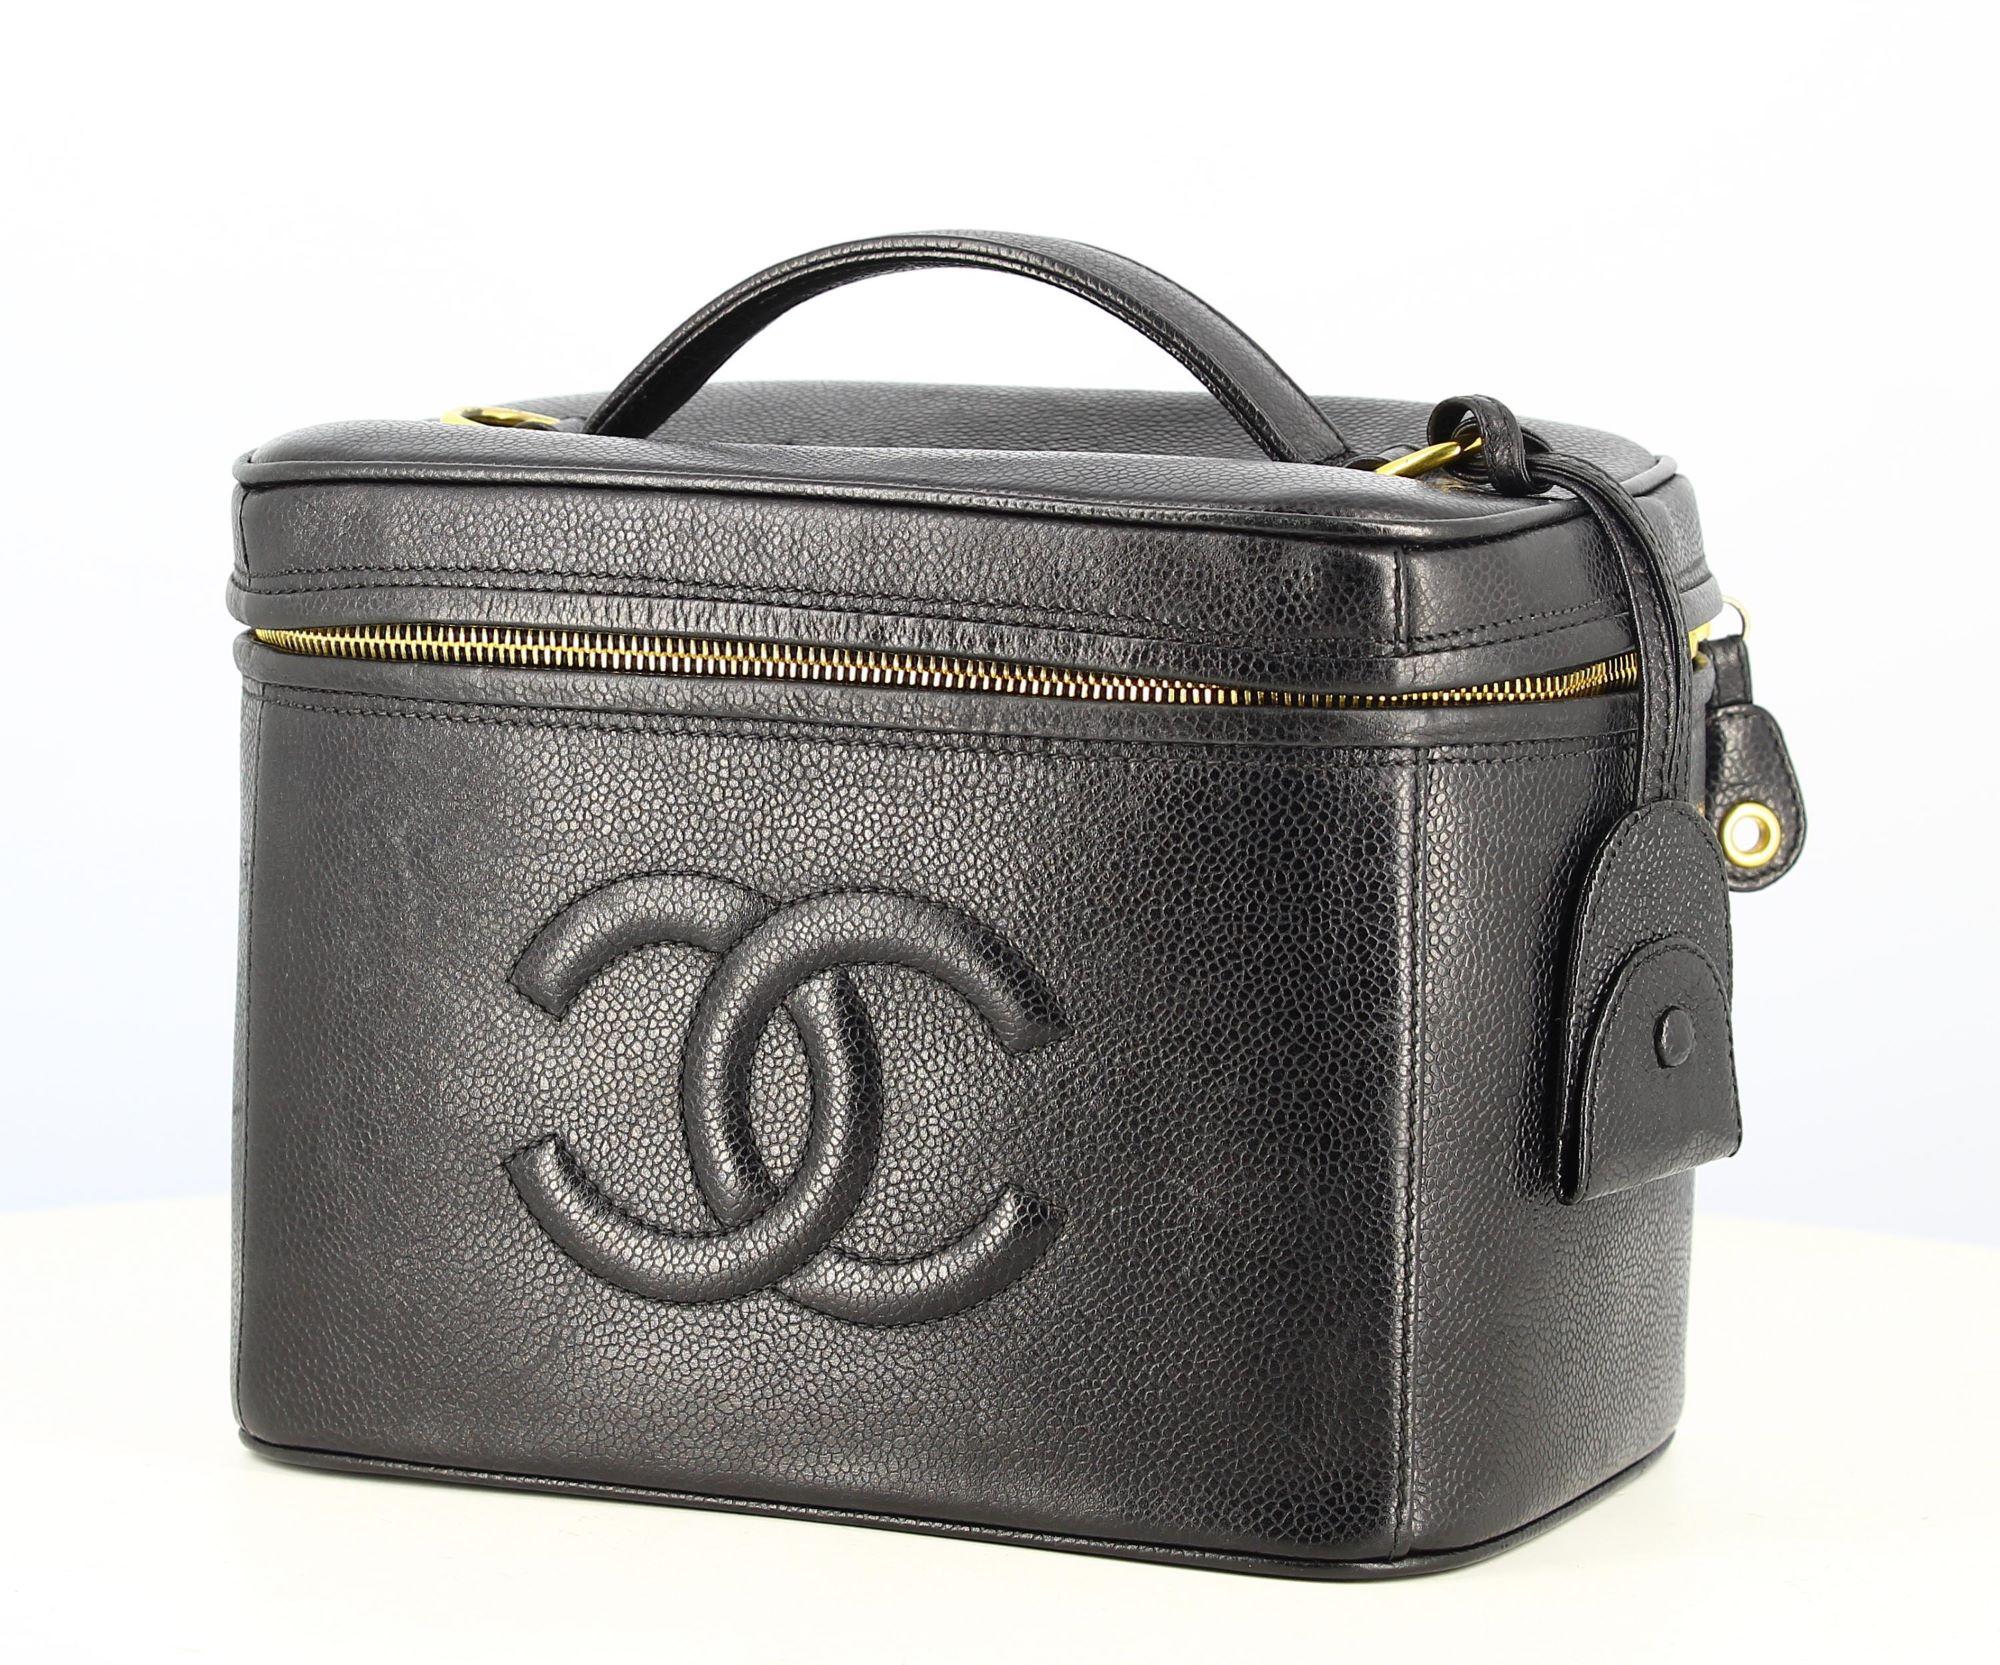 1996-1997 Vanity Handbag Chanel Caviar black
- Good condition, shows slight traces of wear over time
- Black Chanel Vanity handbag in caviar, small hanse, double C logo on the front of the bag, golden plated zip fastener
- The interior is in smooth